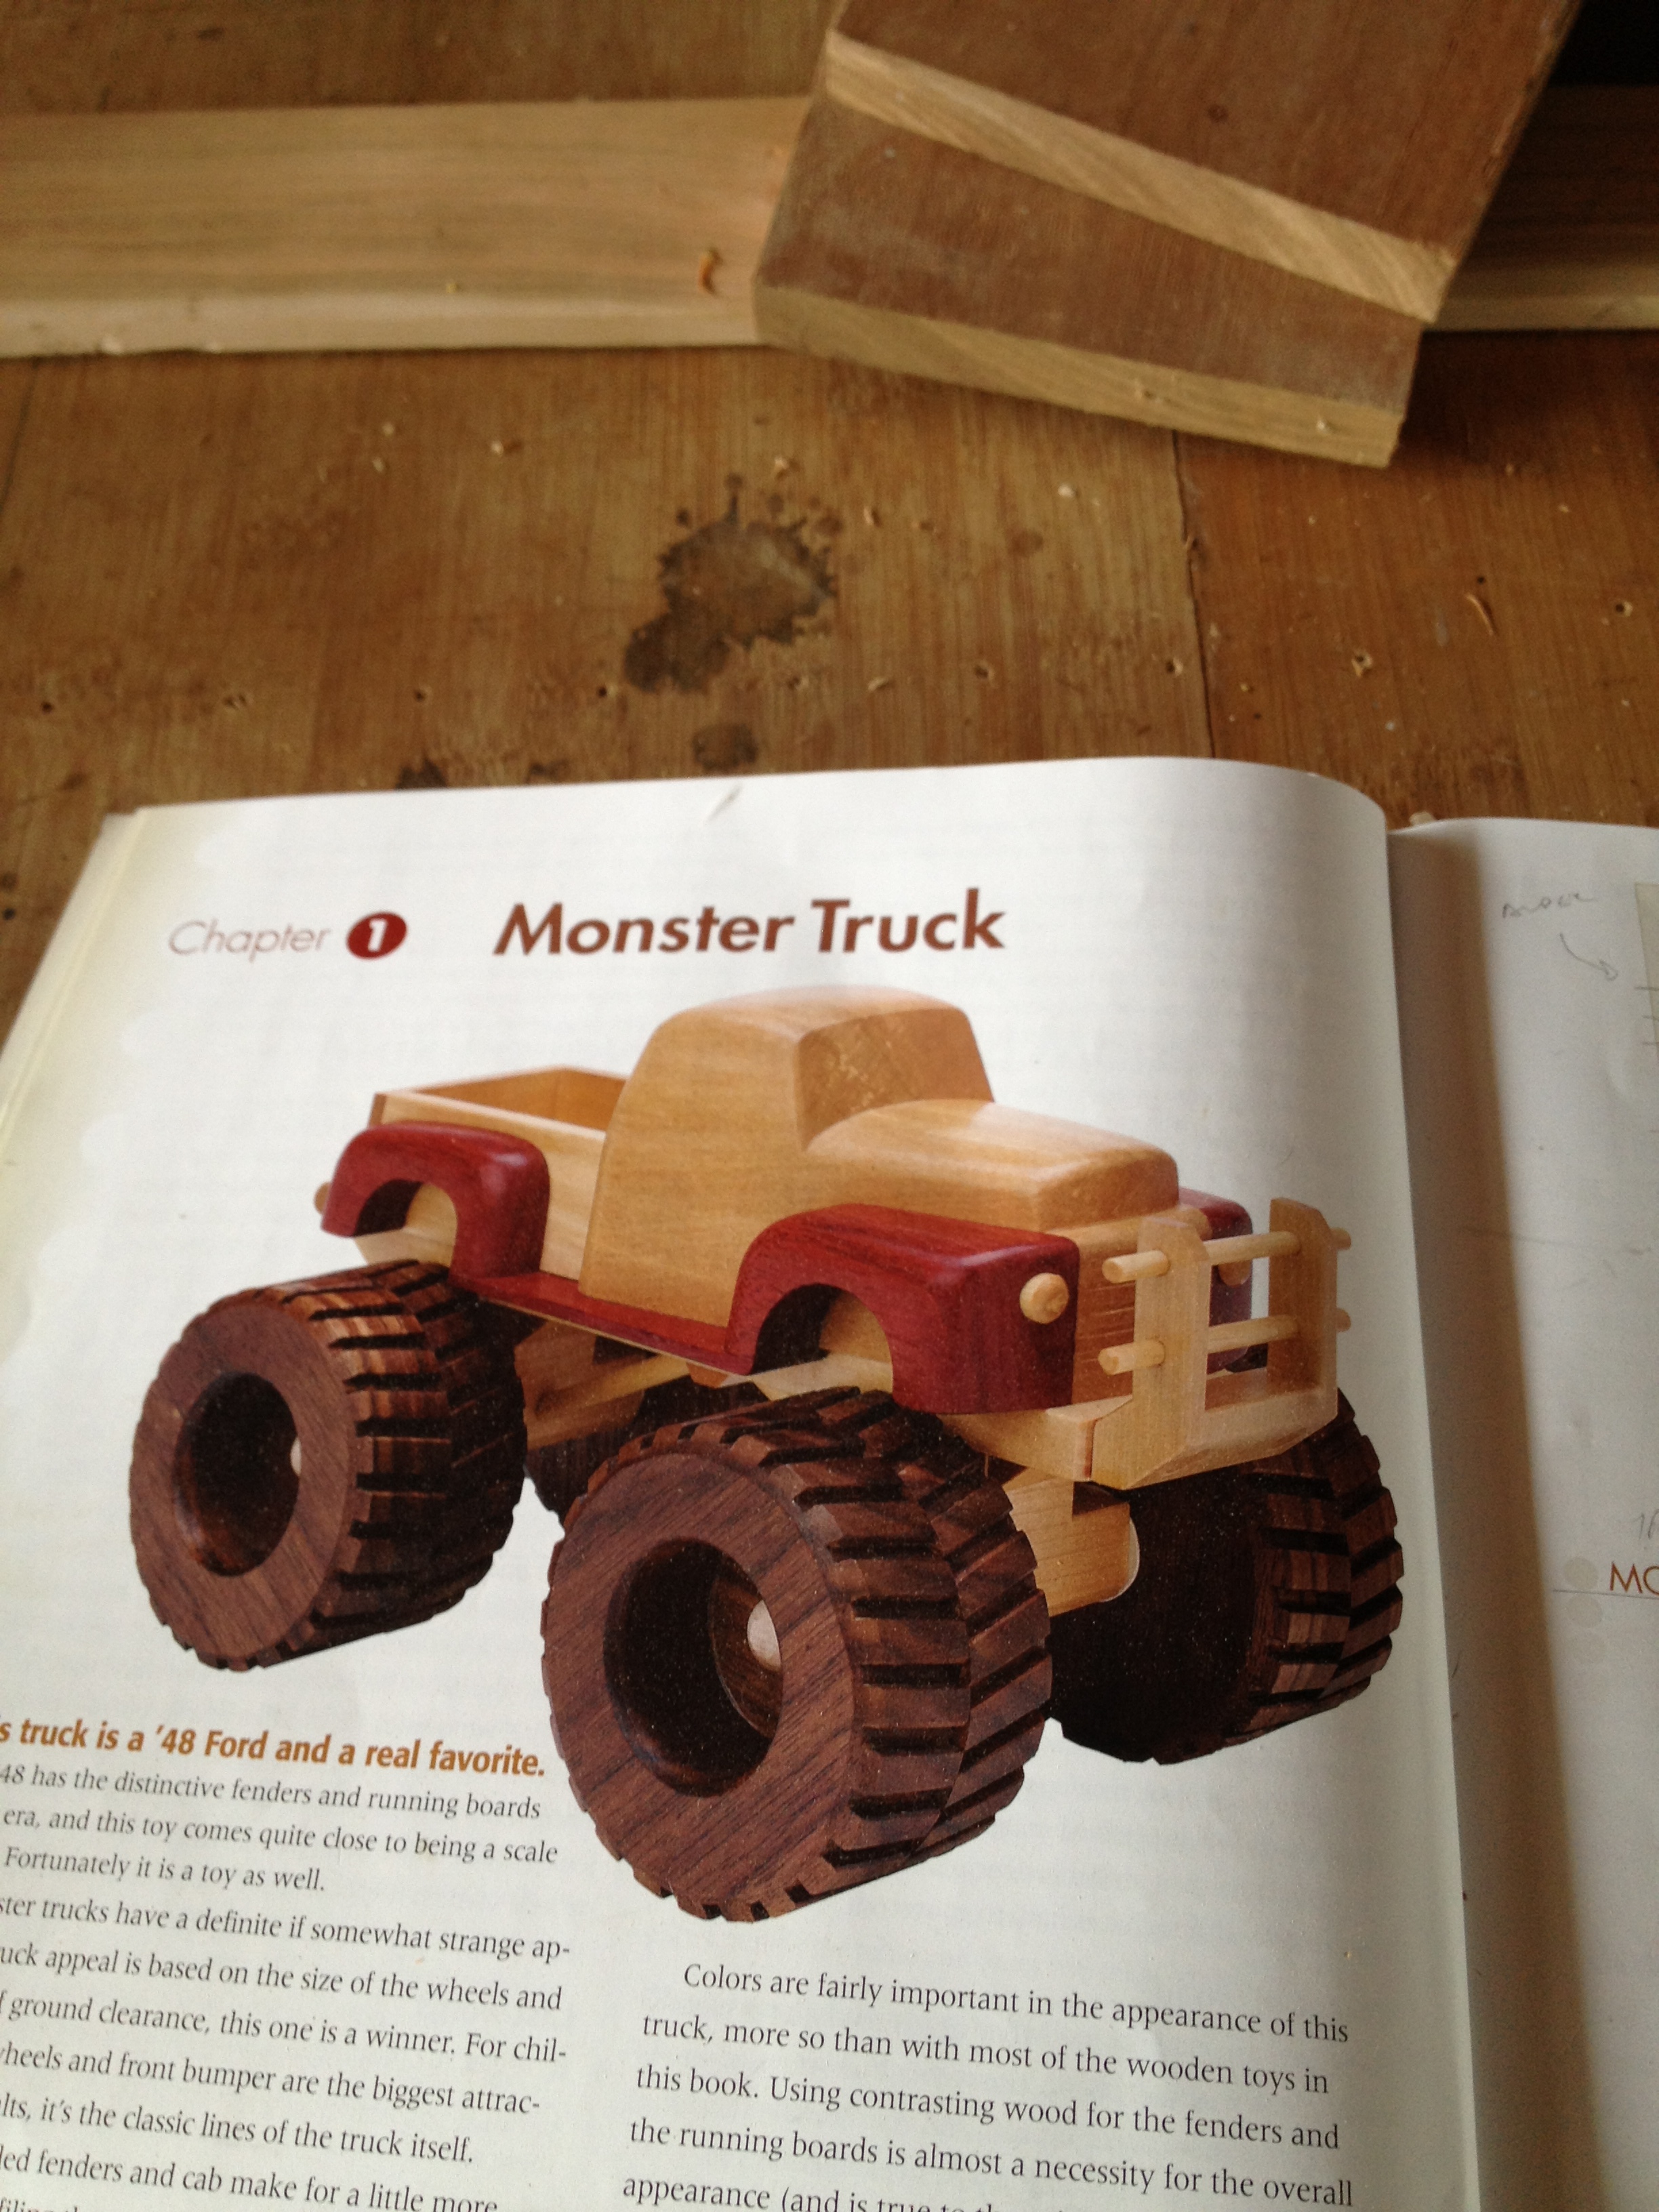  When my nephew came along I had already made a crib for his sister, so I decided to make a toy truck for him. I found this design in a book on toy building.&nbsp; 